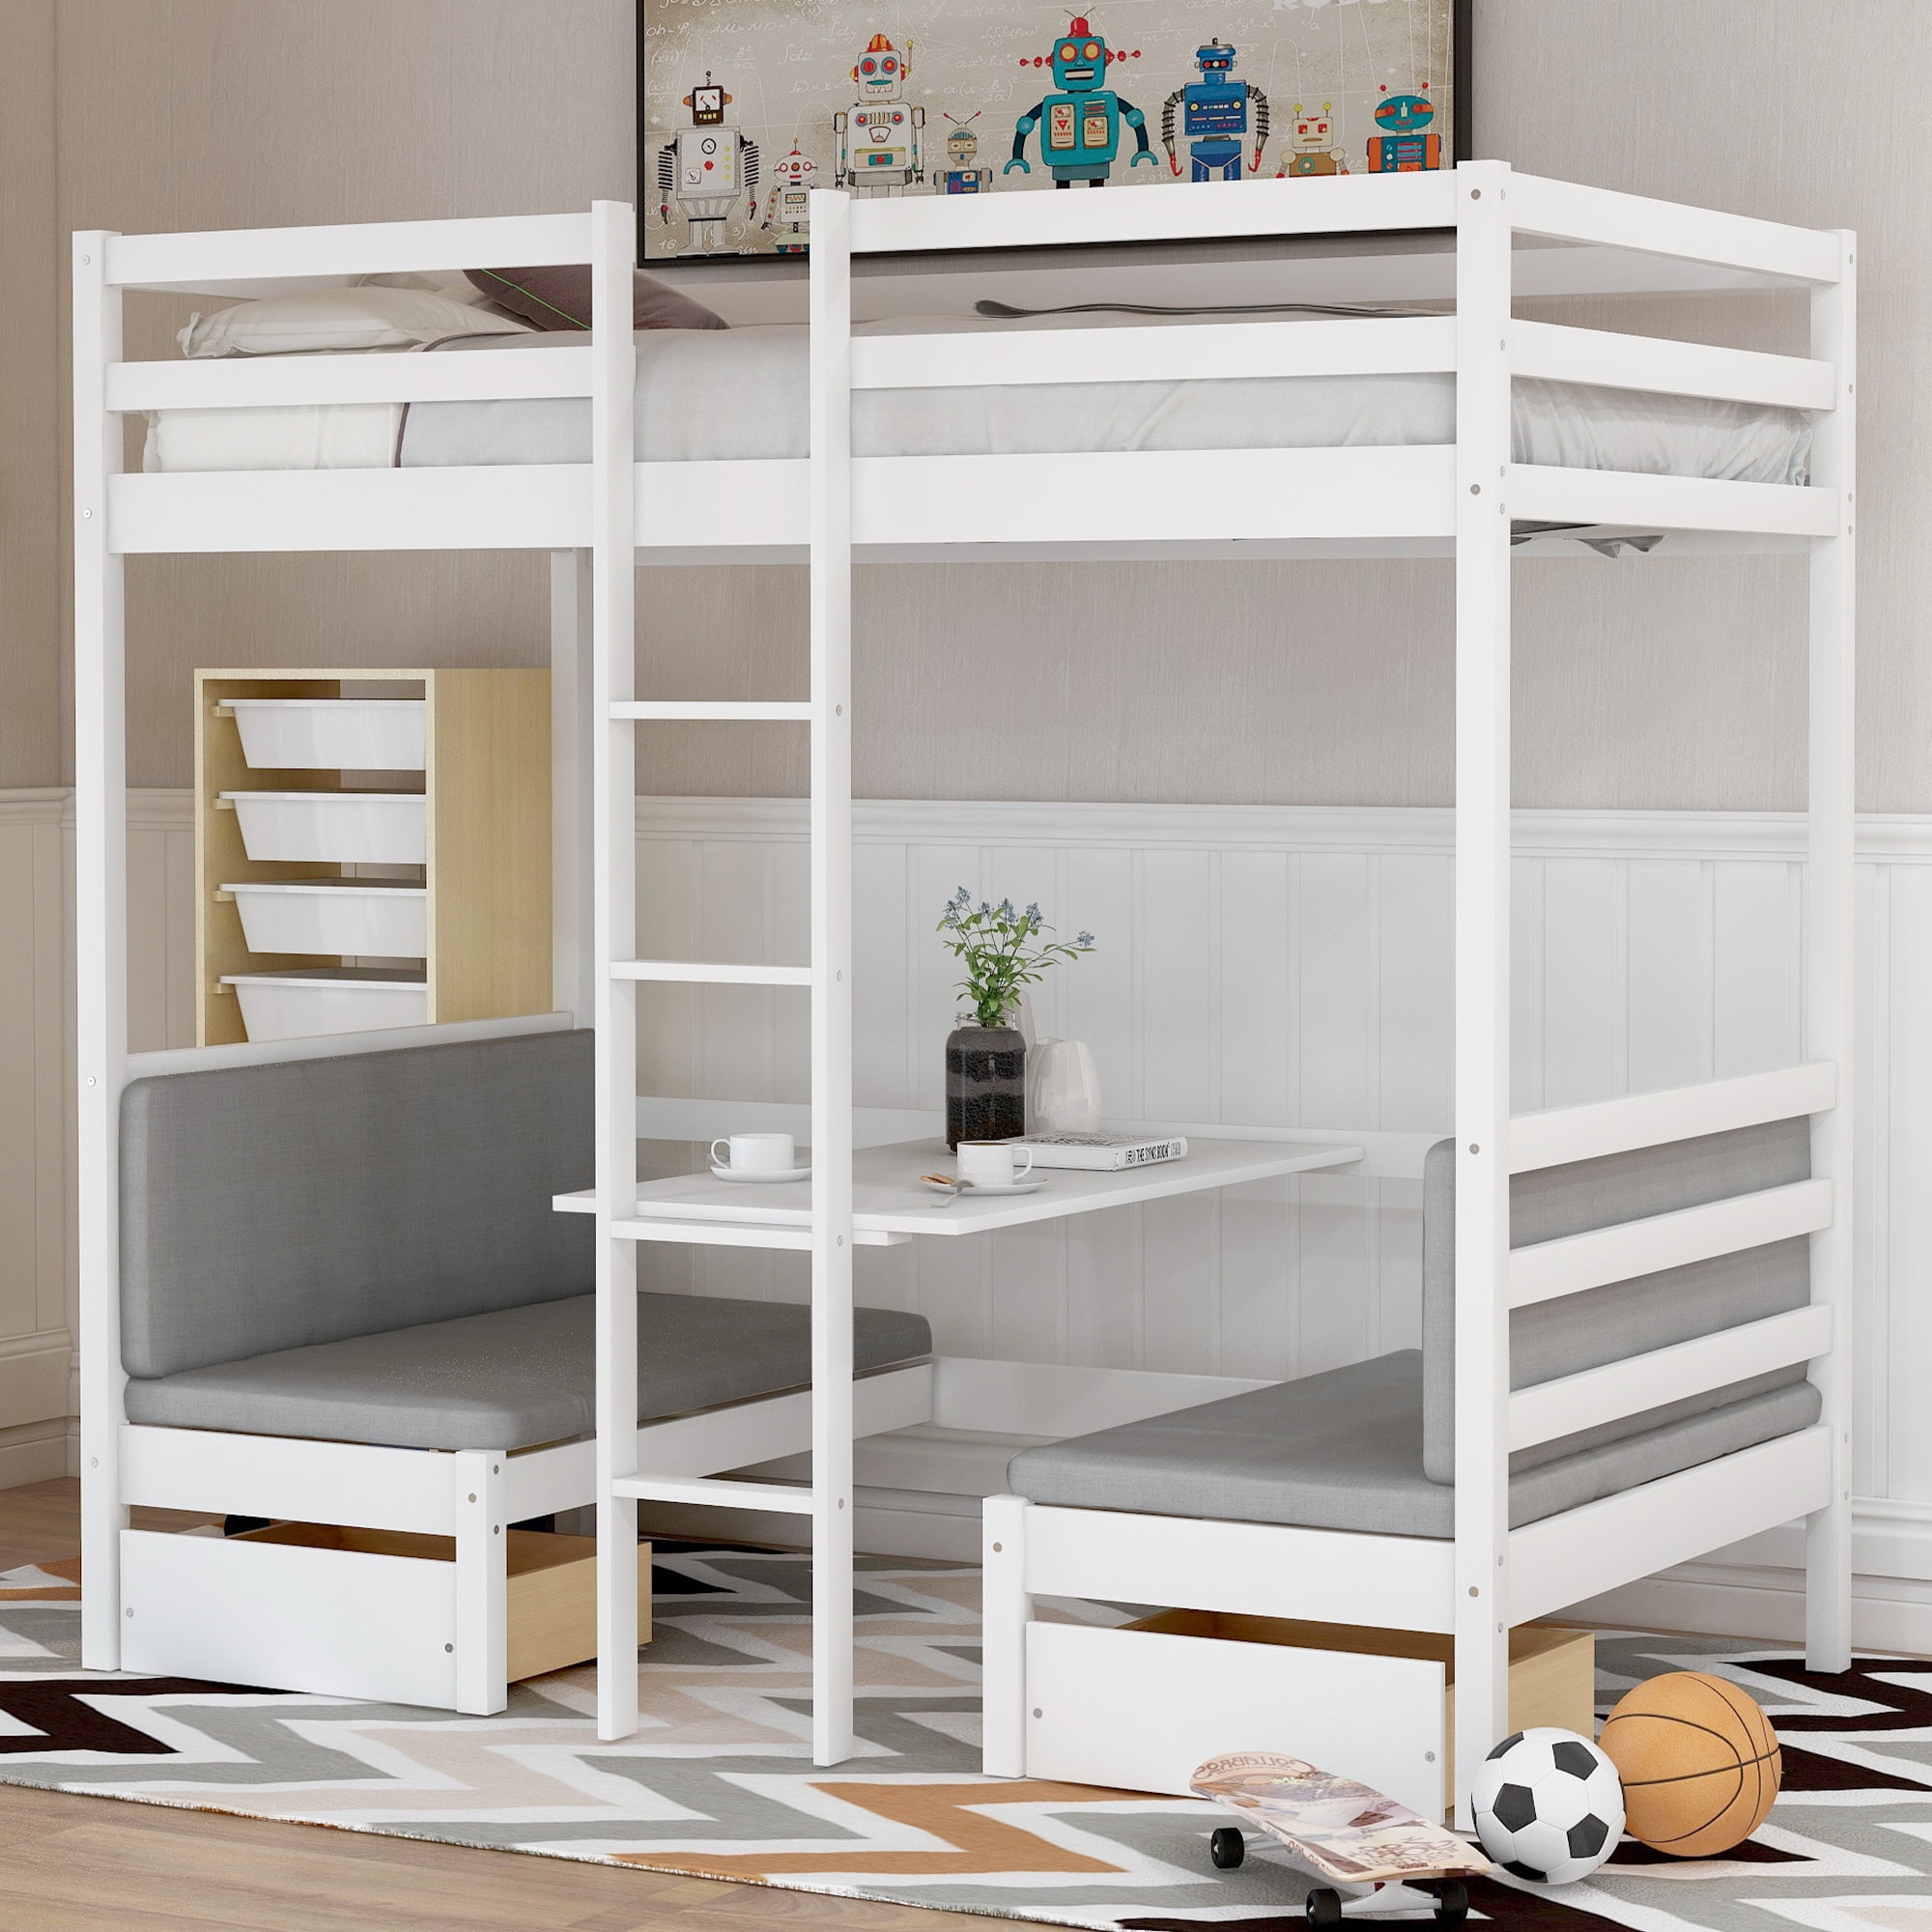 Euroco Solid Wood Convertible Twin Bunk, Convertible Bunk Beds Full Over Full